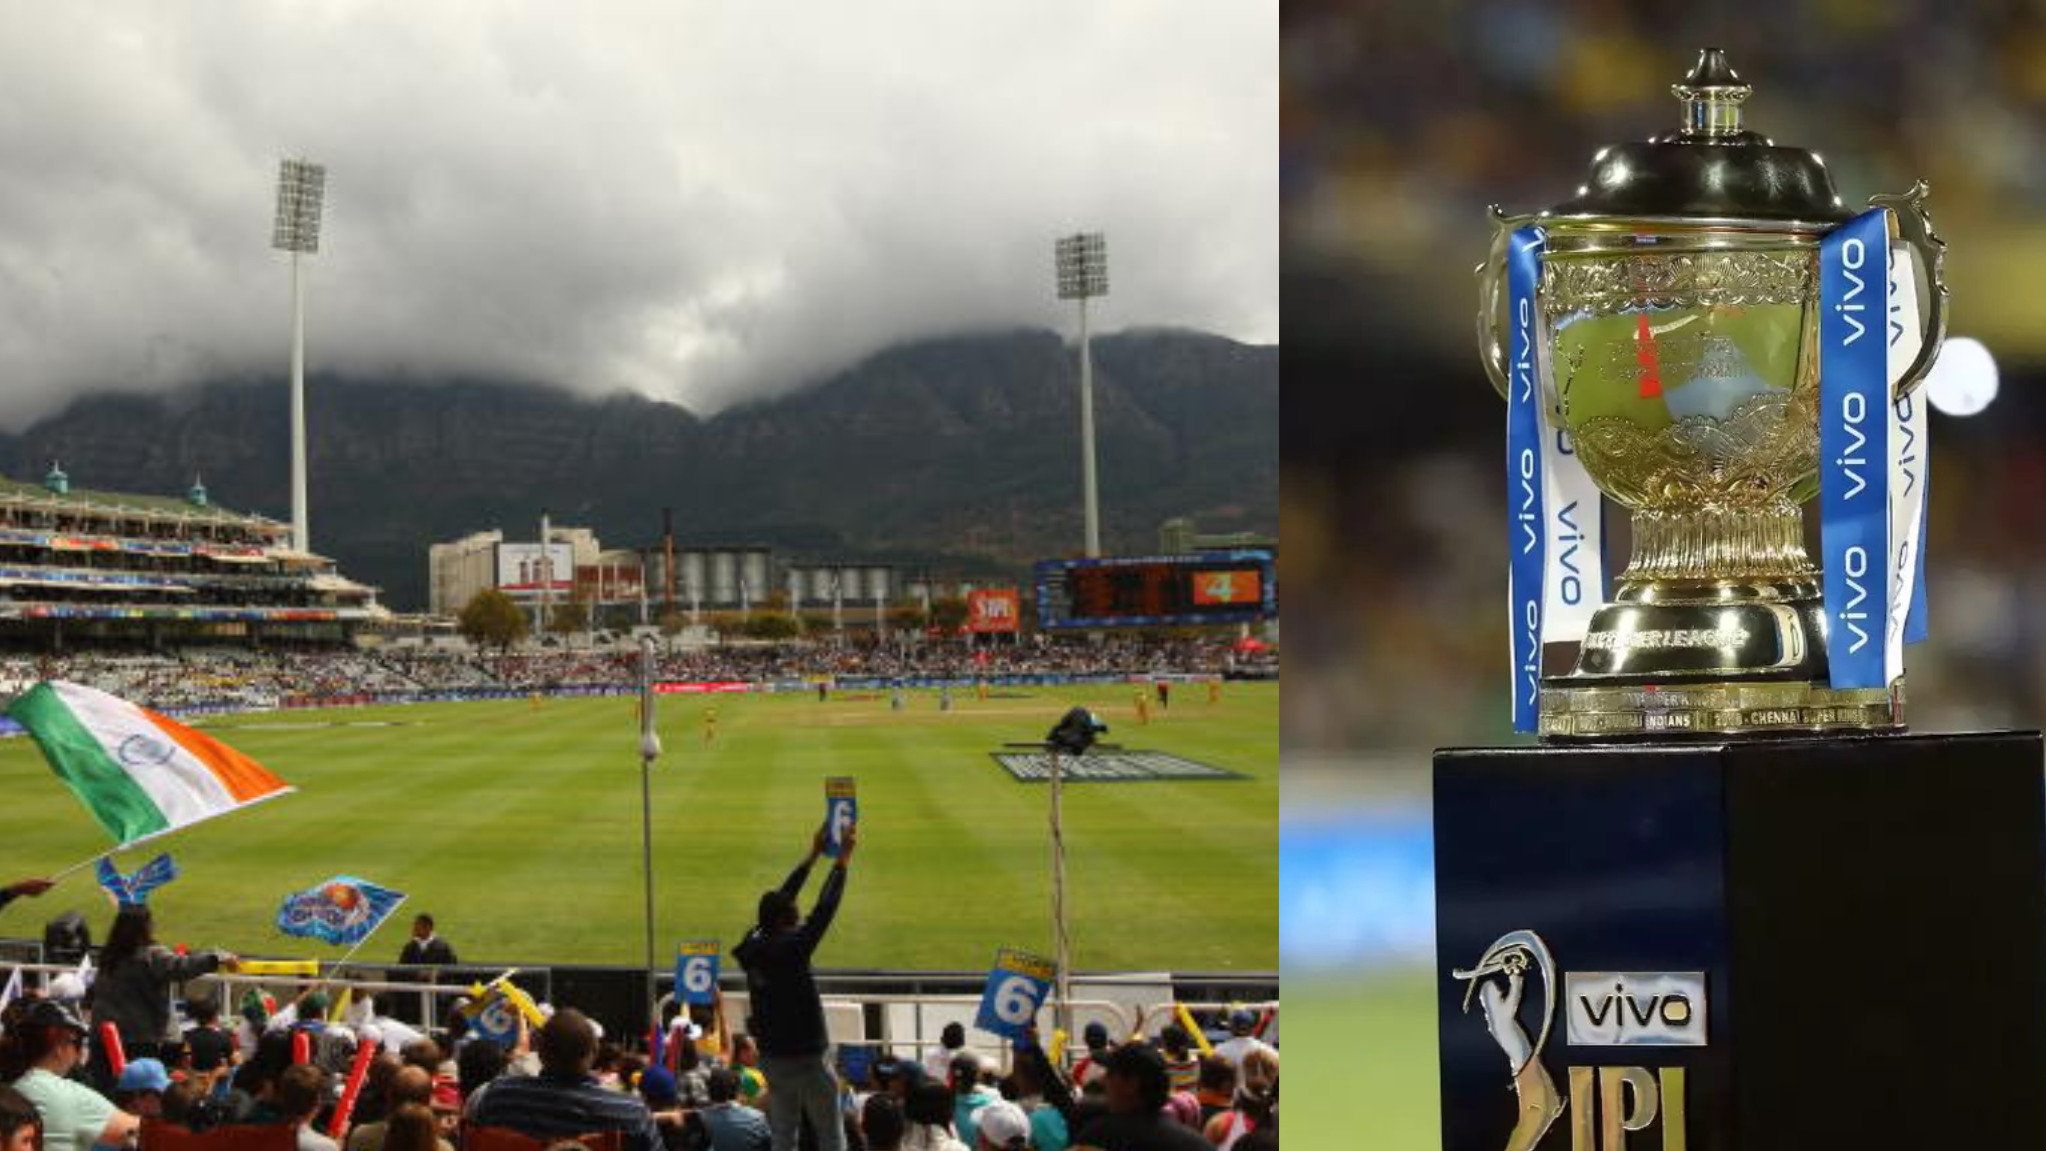 CSA offers to host the IPL 2022 in South Africa as a cheaper option to BCCI- Report